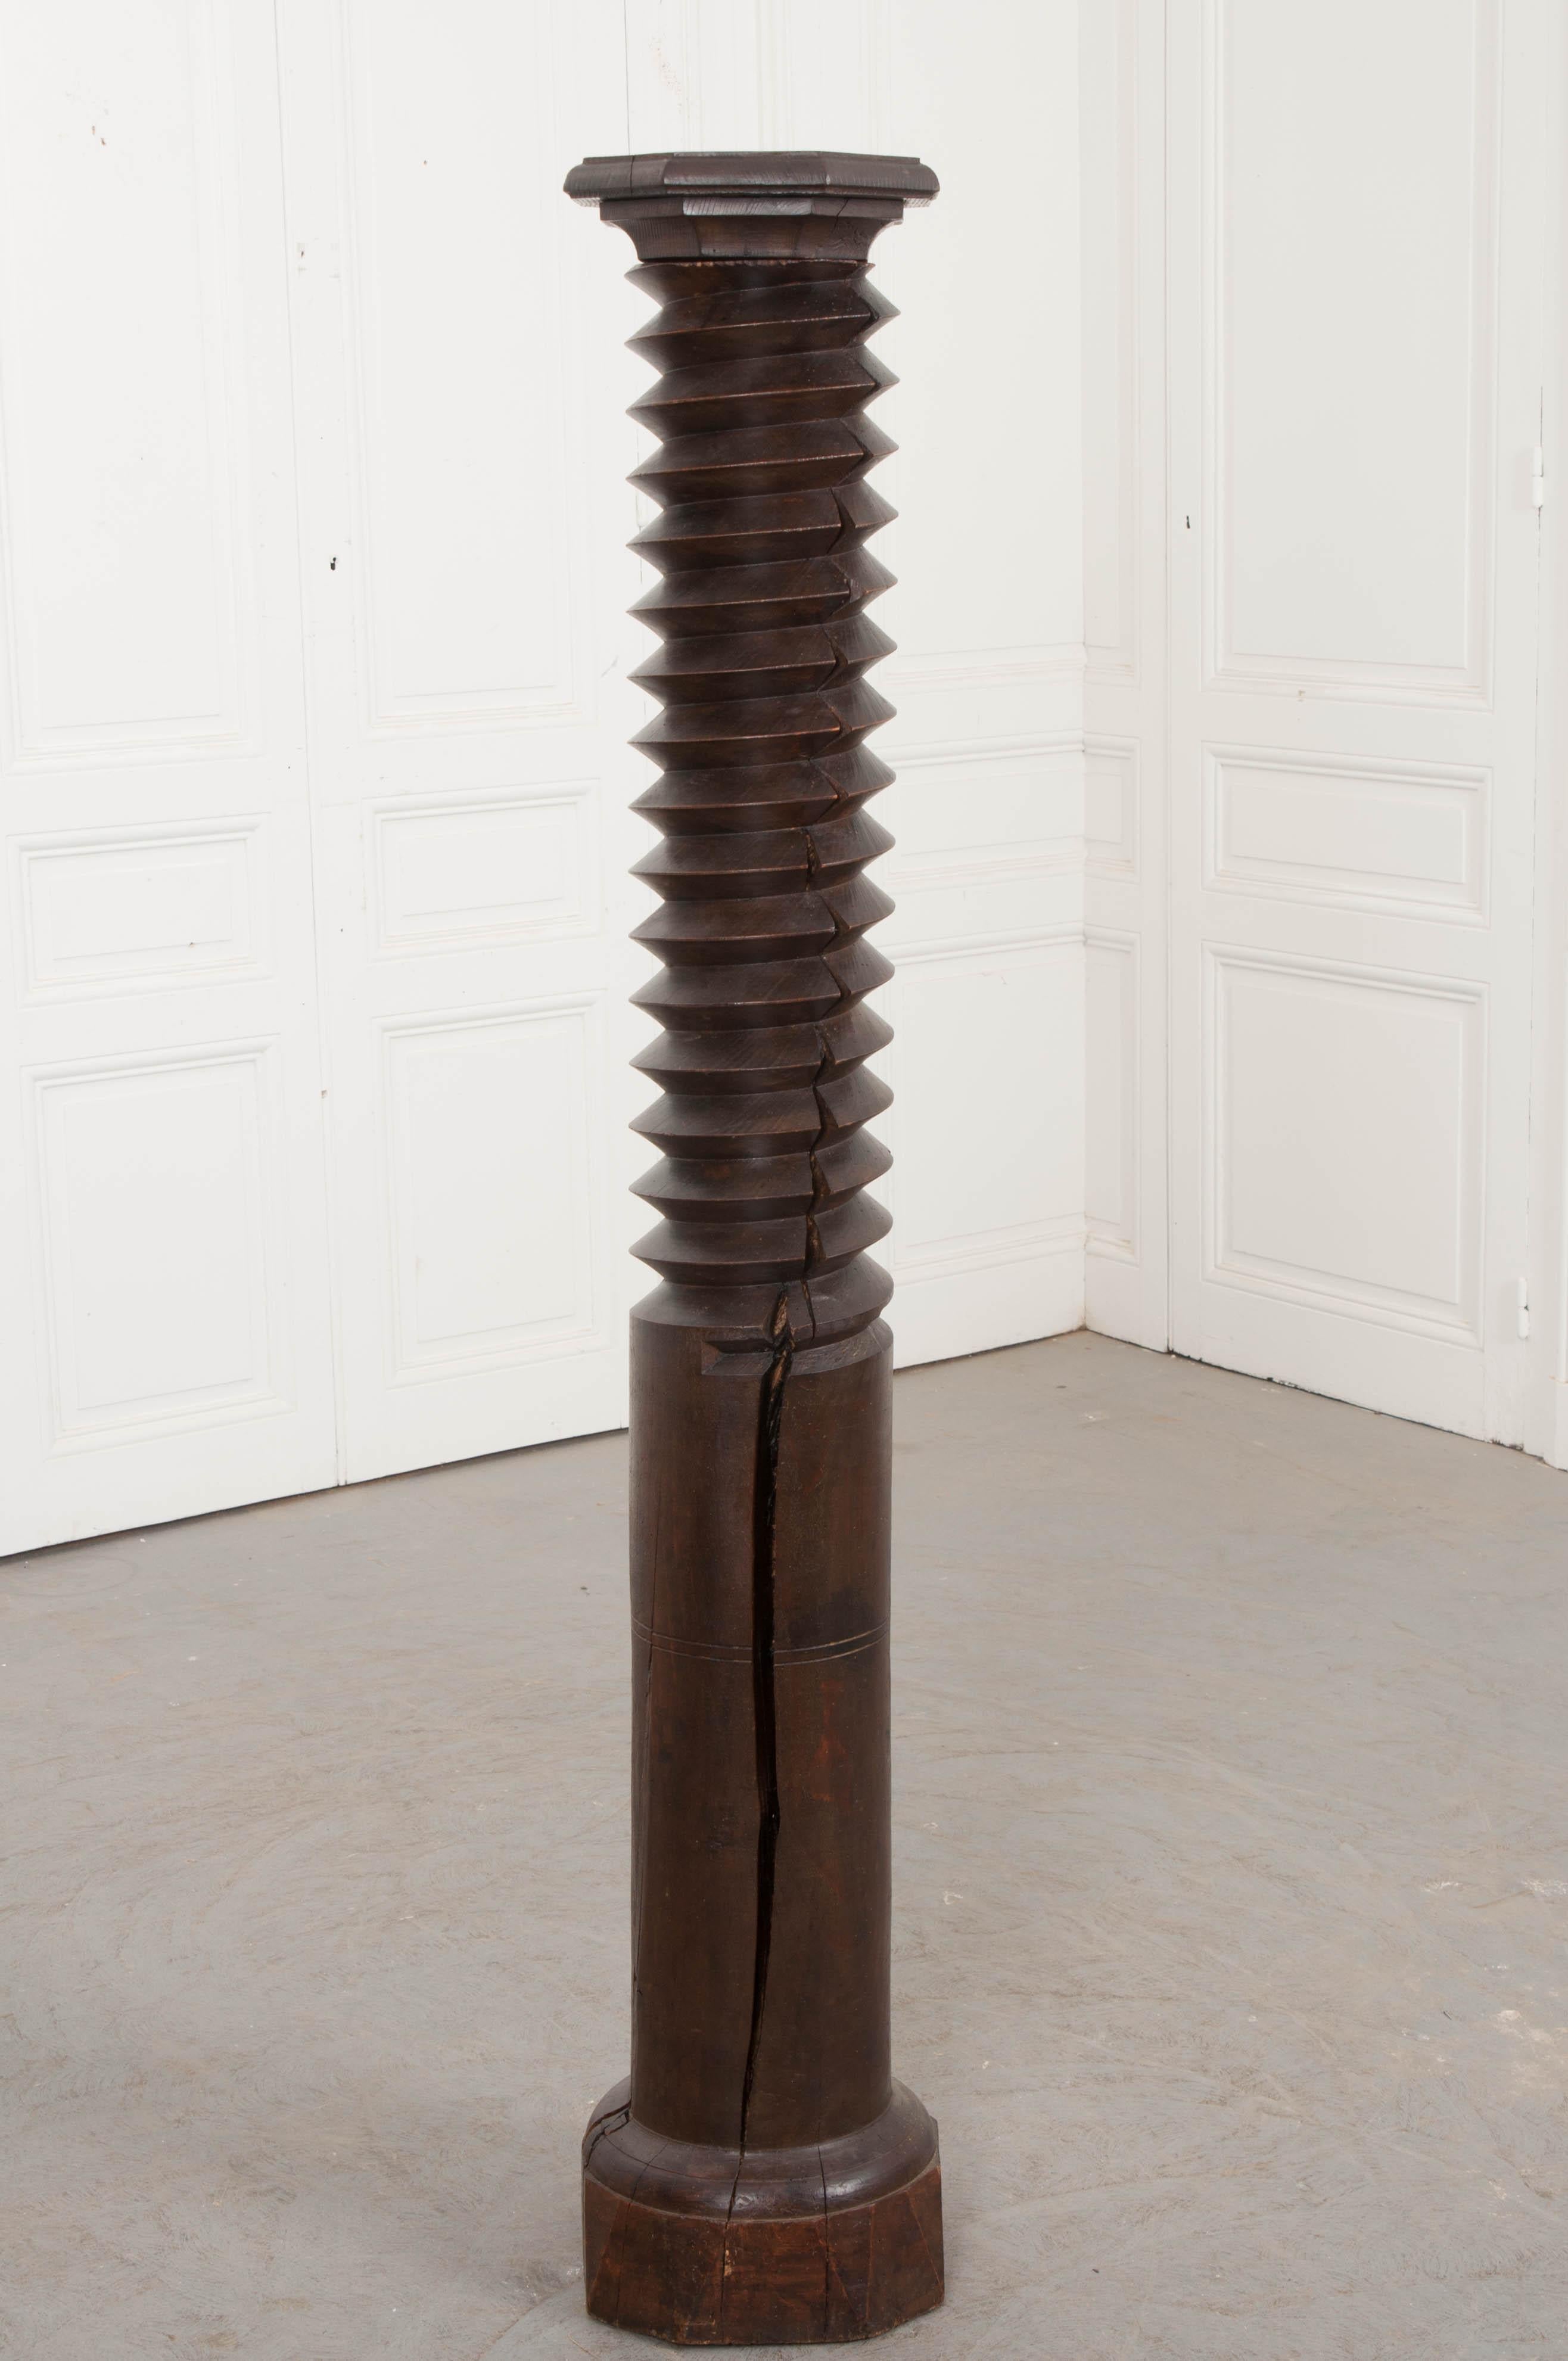 This wonderfully-aged wine press screw, circa 1880s, from a winery in France, has a deep wine-stained patina. Not only is this piece a conversation starter, its striking presence is sure to ground a room perfectly. It could also be converted into a